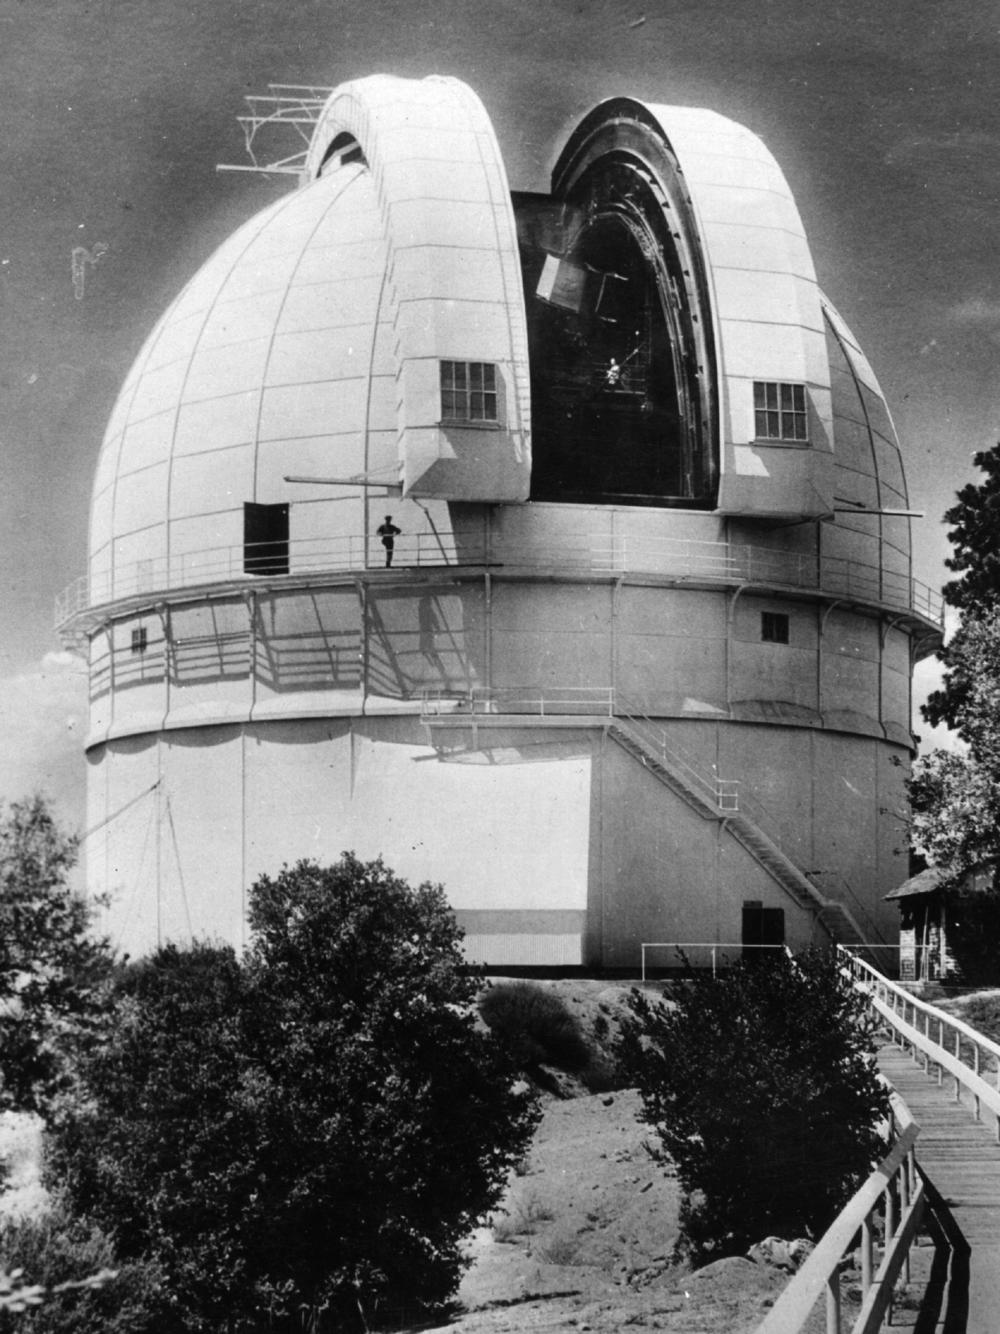 The Hooker telescope dome at the Mount Wilson Observatory, circa 1921.